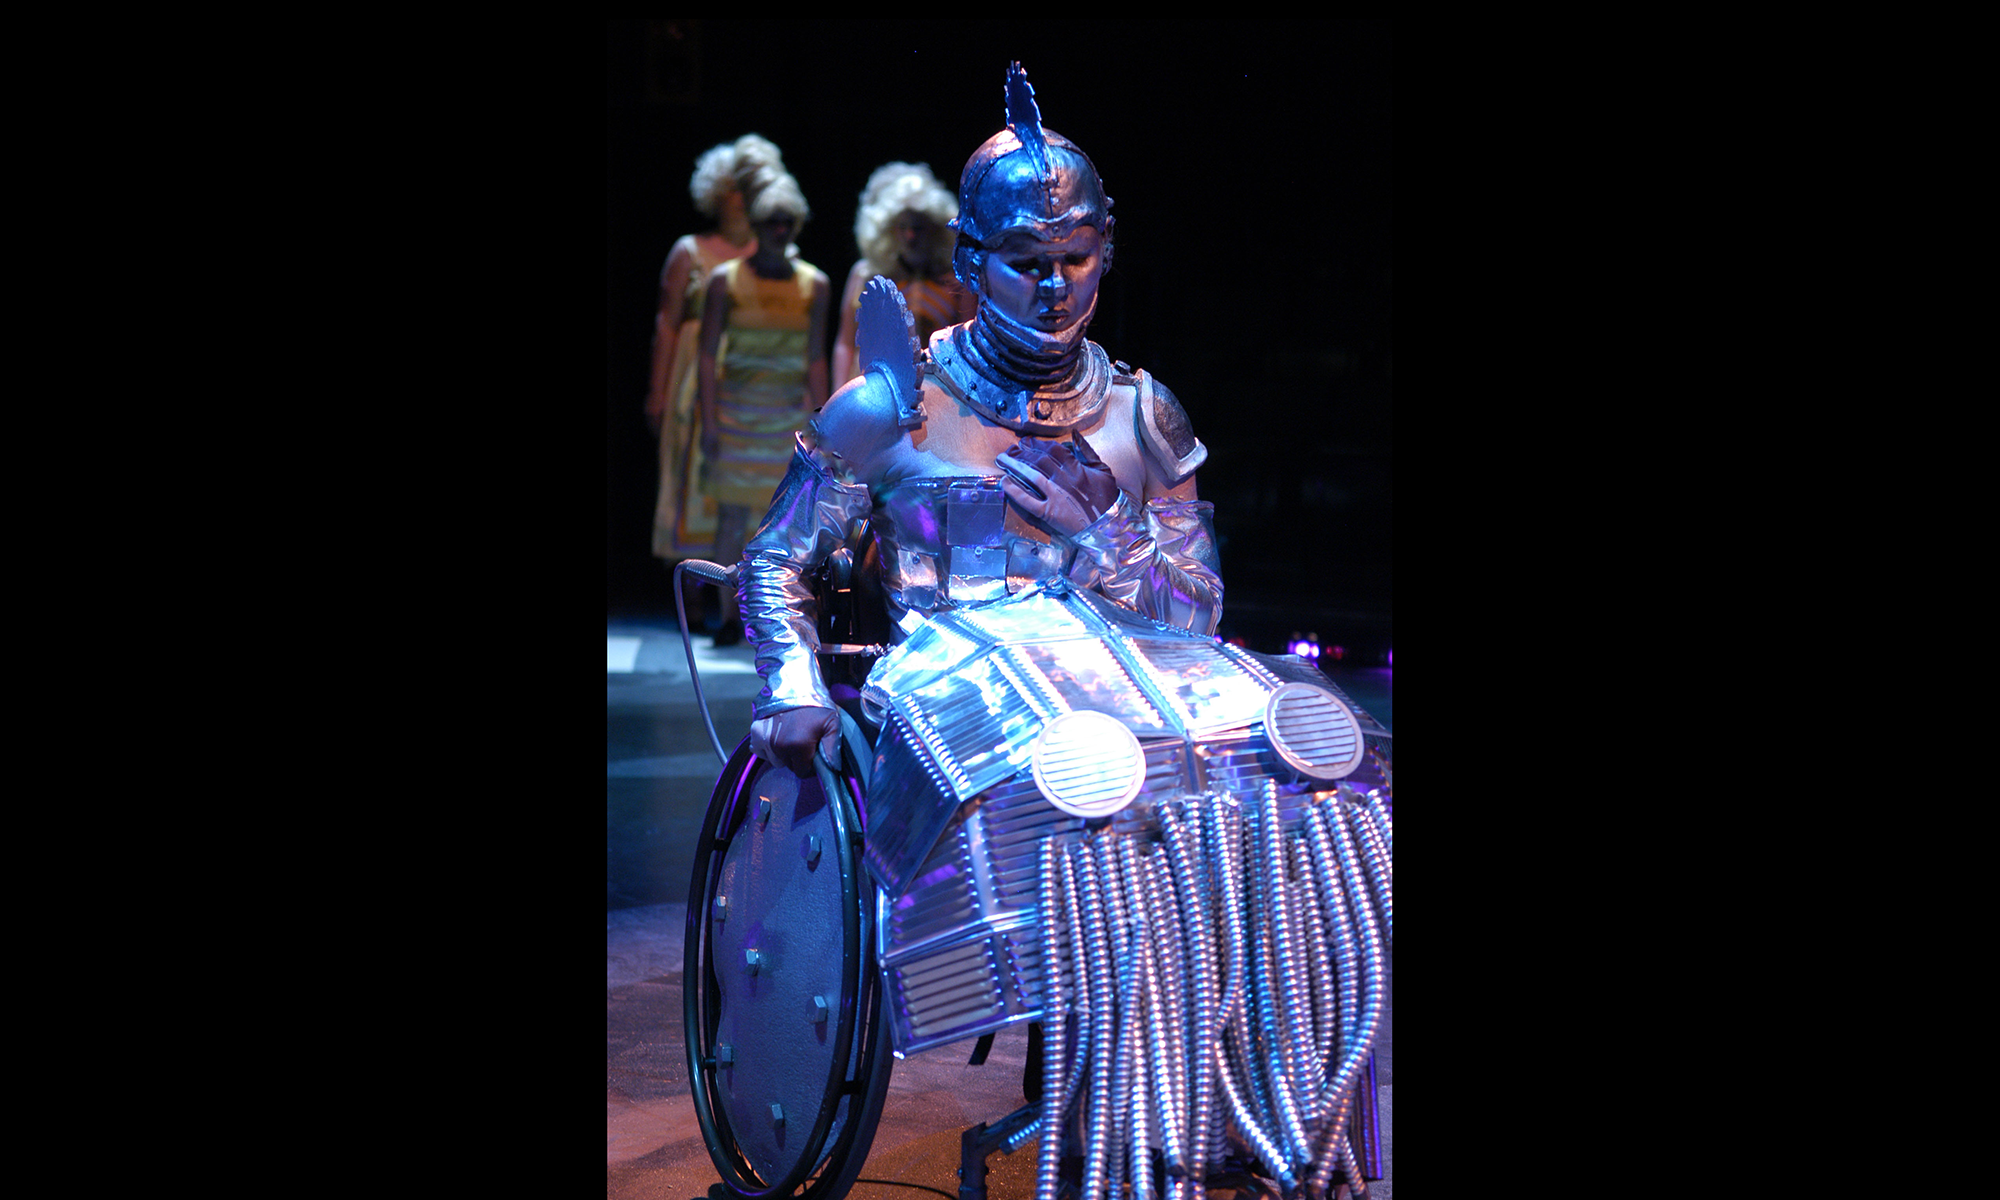 wheelchair user in dramatic lighting in tin metal costume from head to wheel, saw blade on top of head and shoulders, metal-plated corset and metal skirt